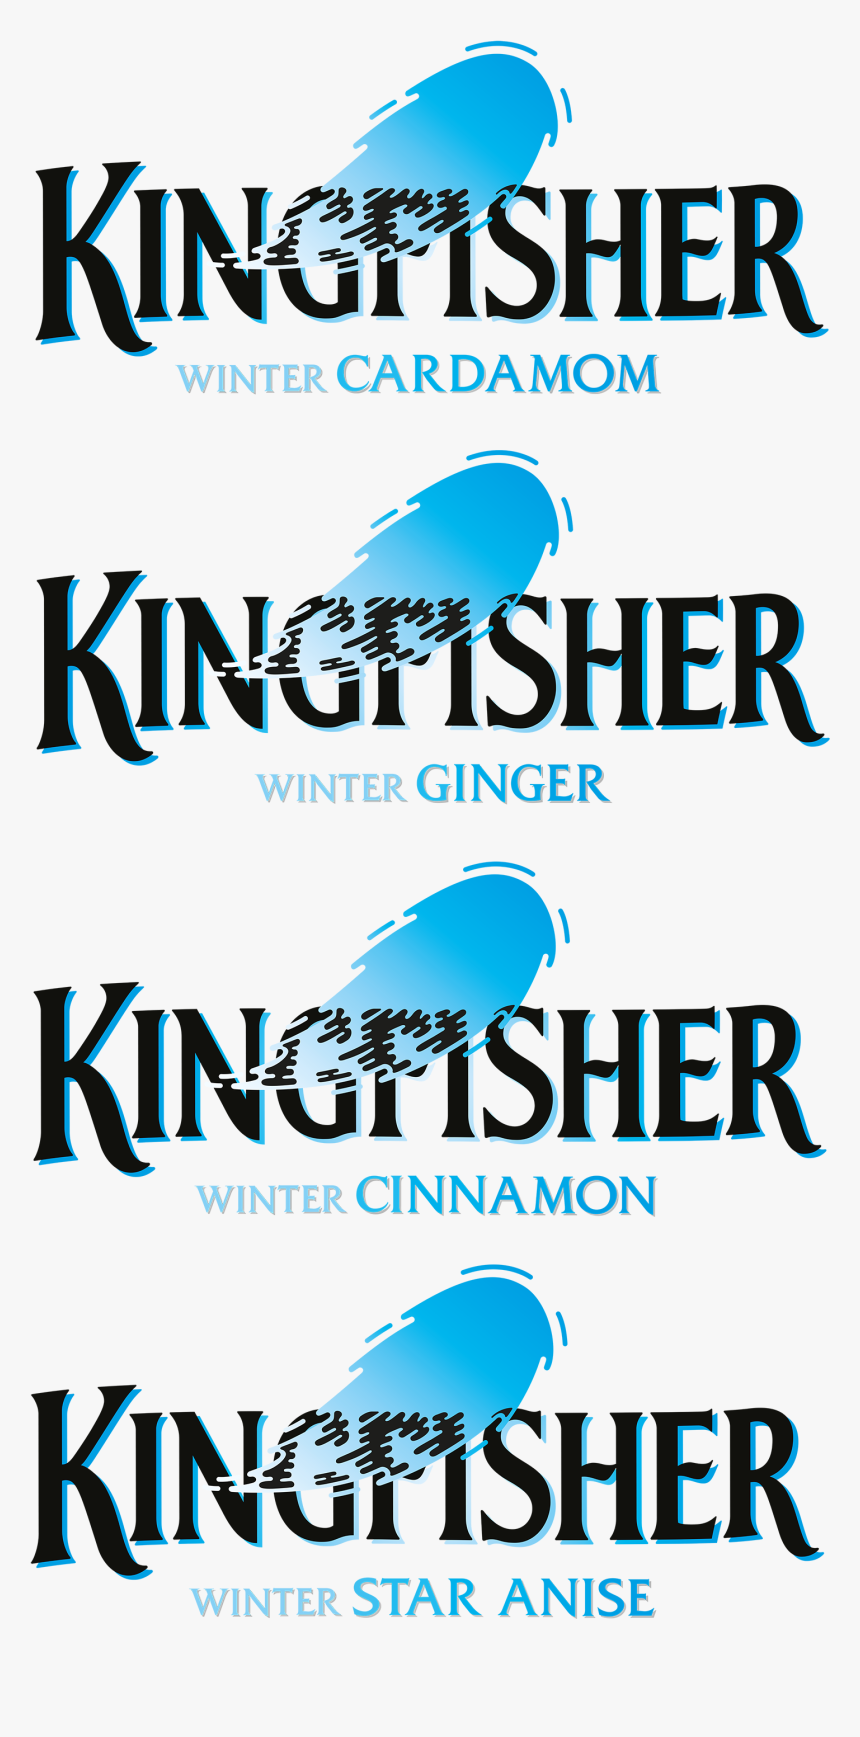 Kingfisher Png, Transparent Png, Free Download